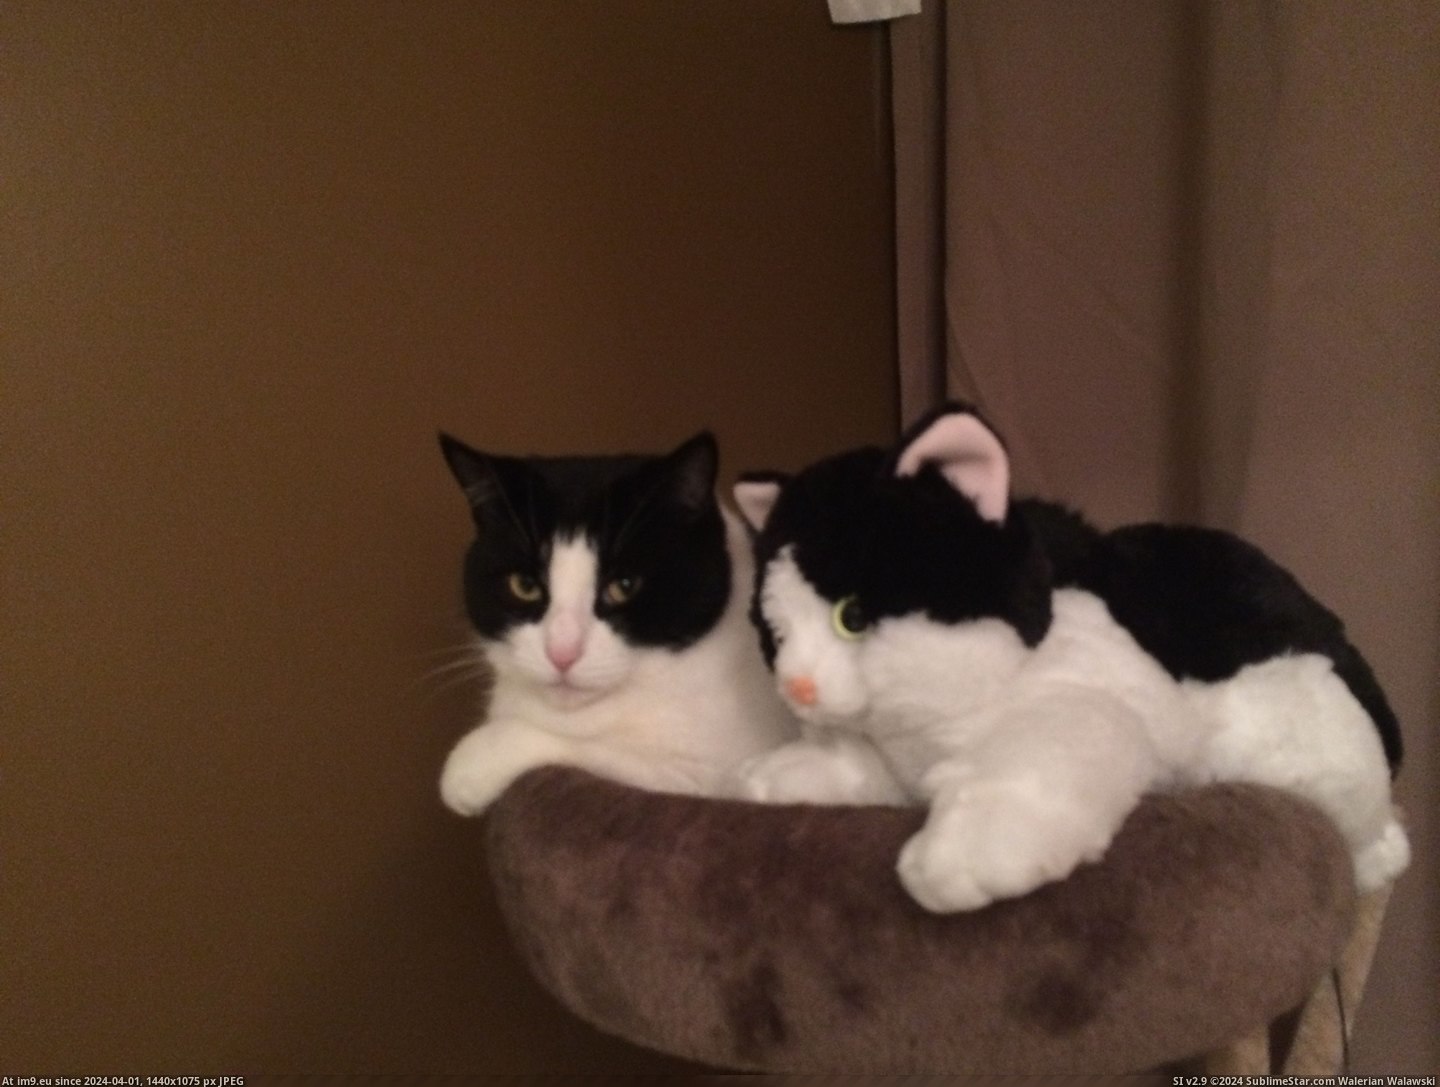 #Cats #Ozzy #Twin [Cats] Ozzy and her little twin 2 Pic. (Bild von album My r/CATS favs))